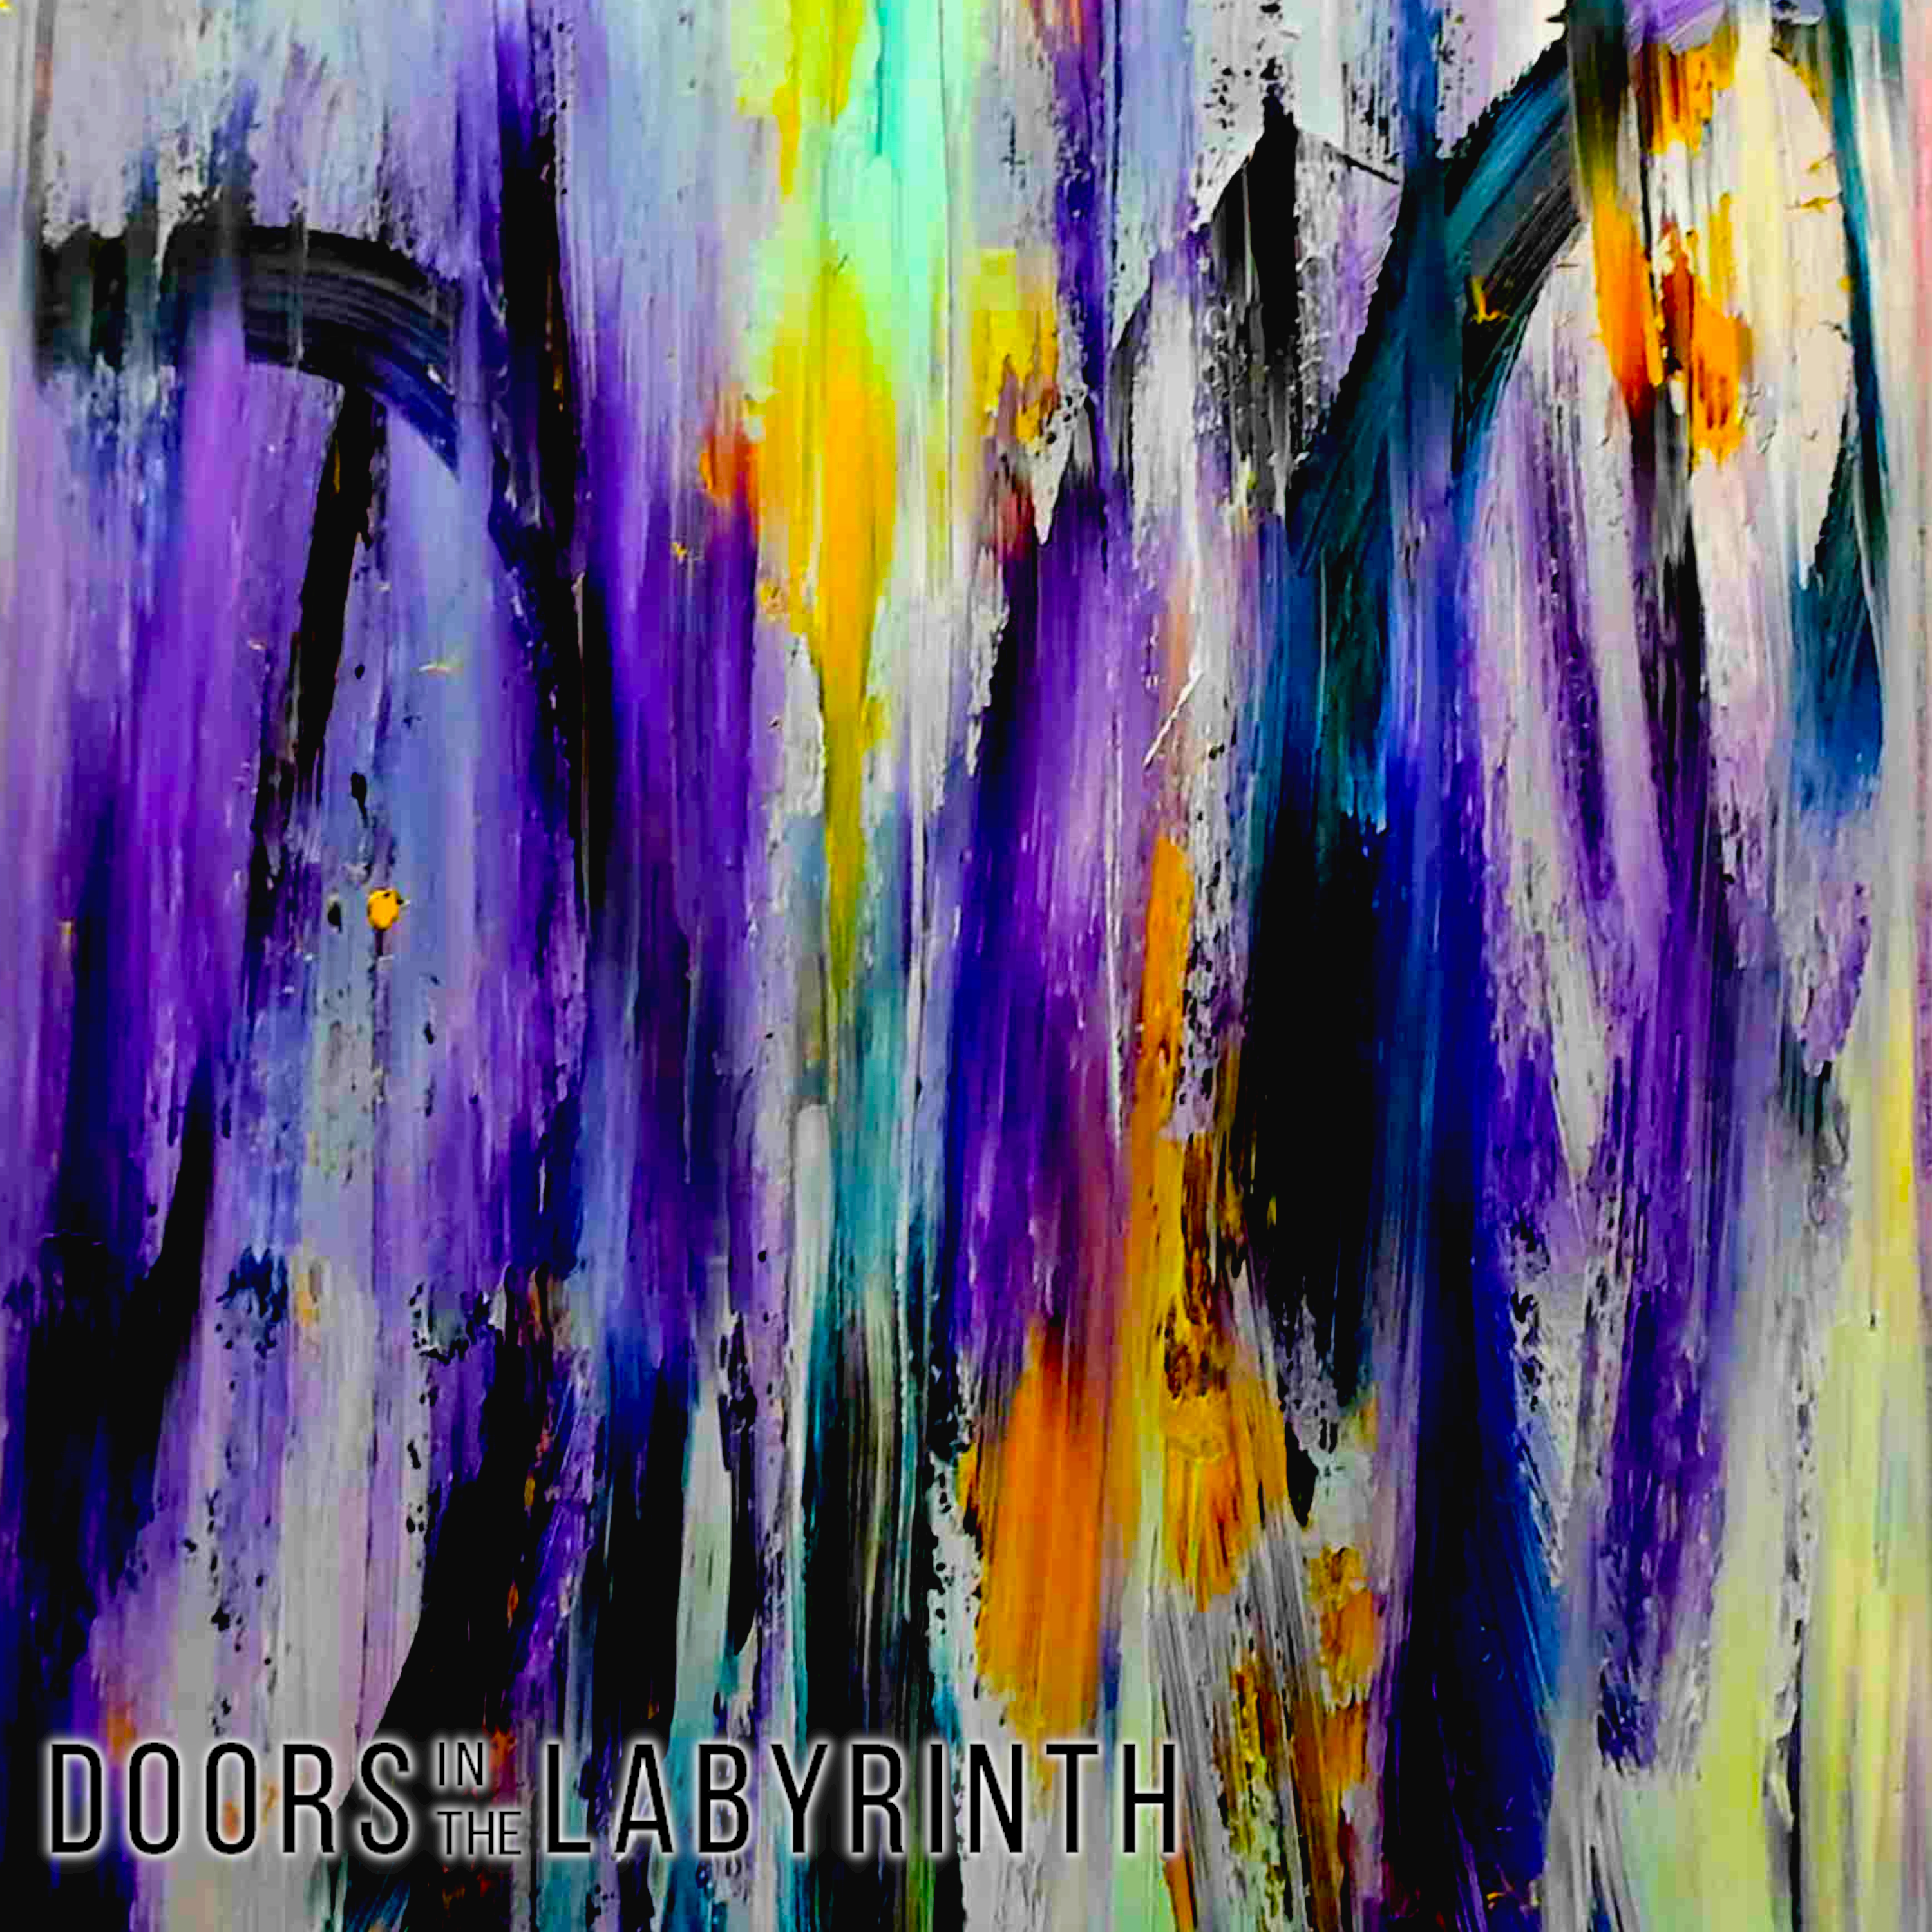 Doors In The Labyrinth